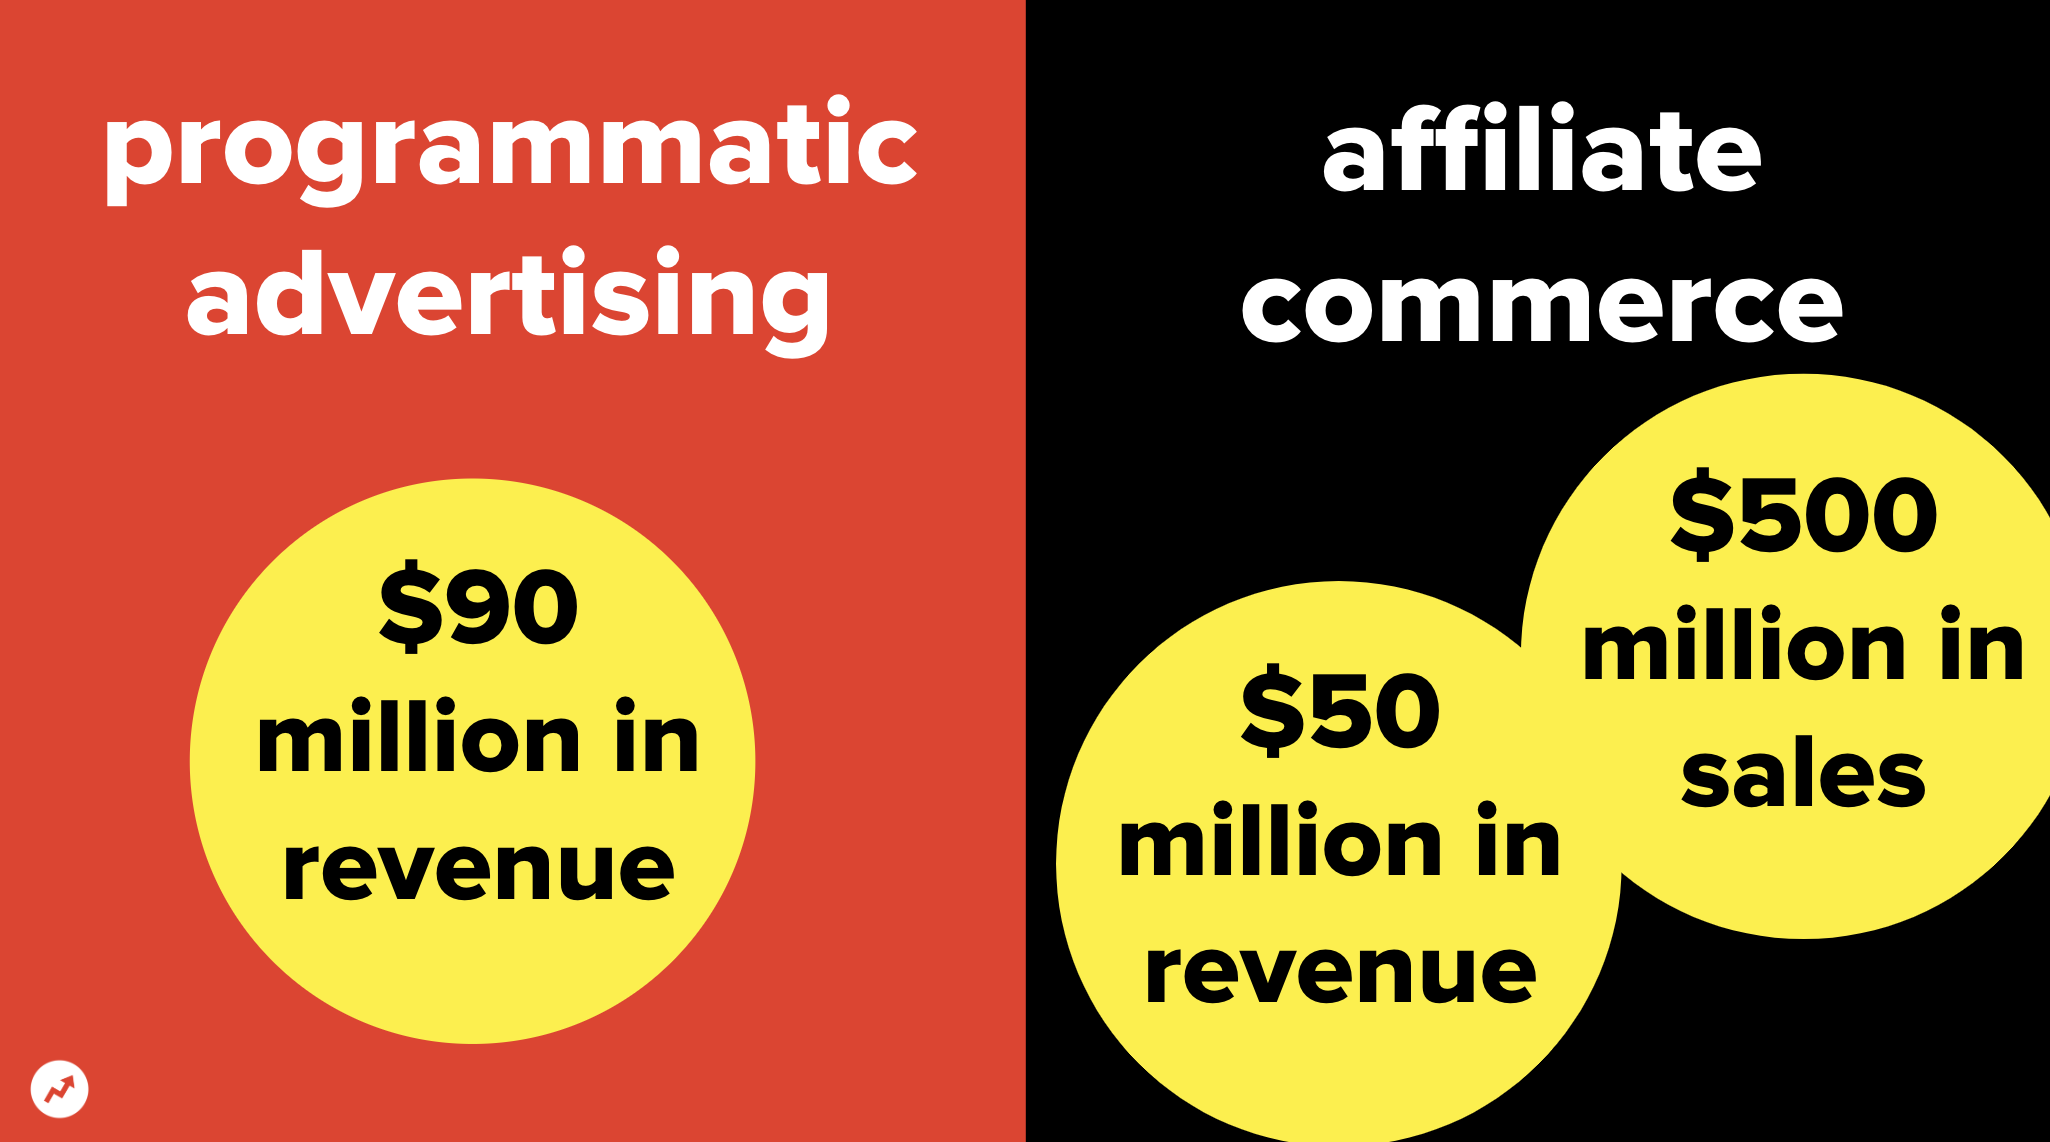 Graphic comparing programmatic advertising and affiliate commerce revenues